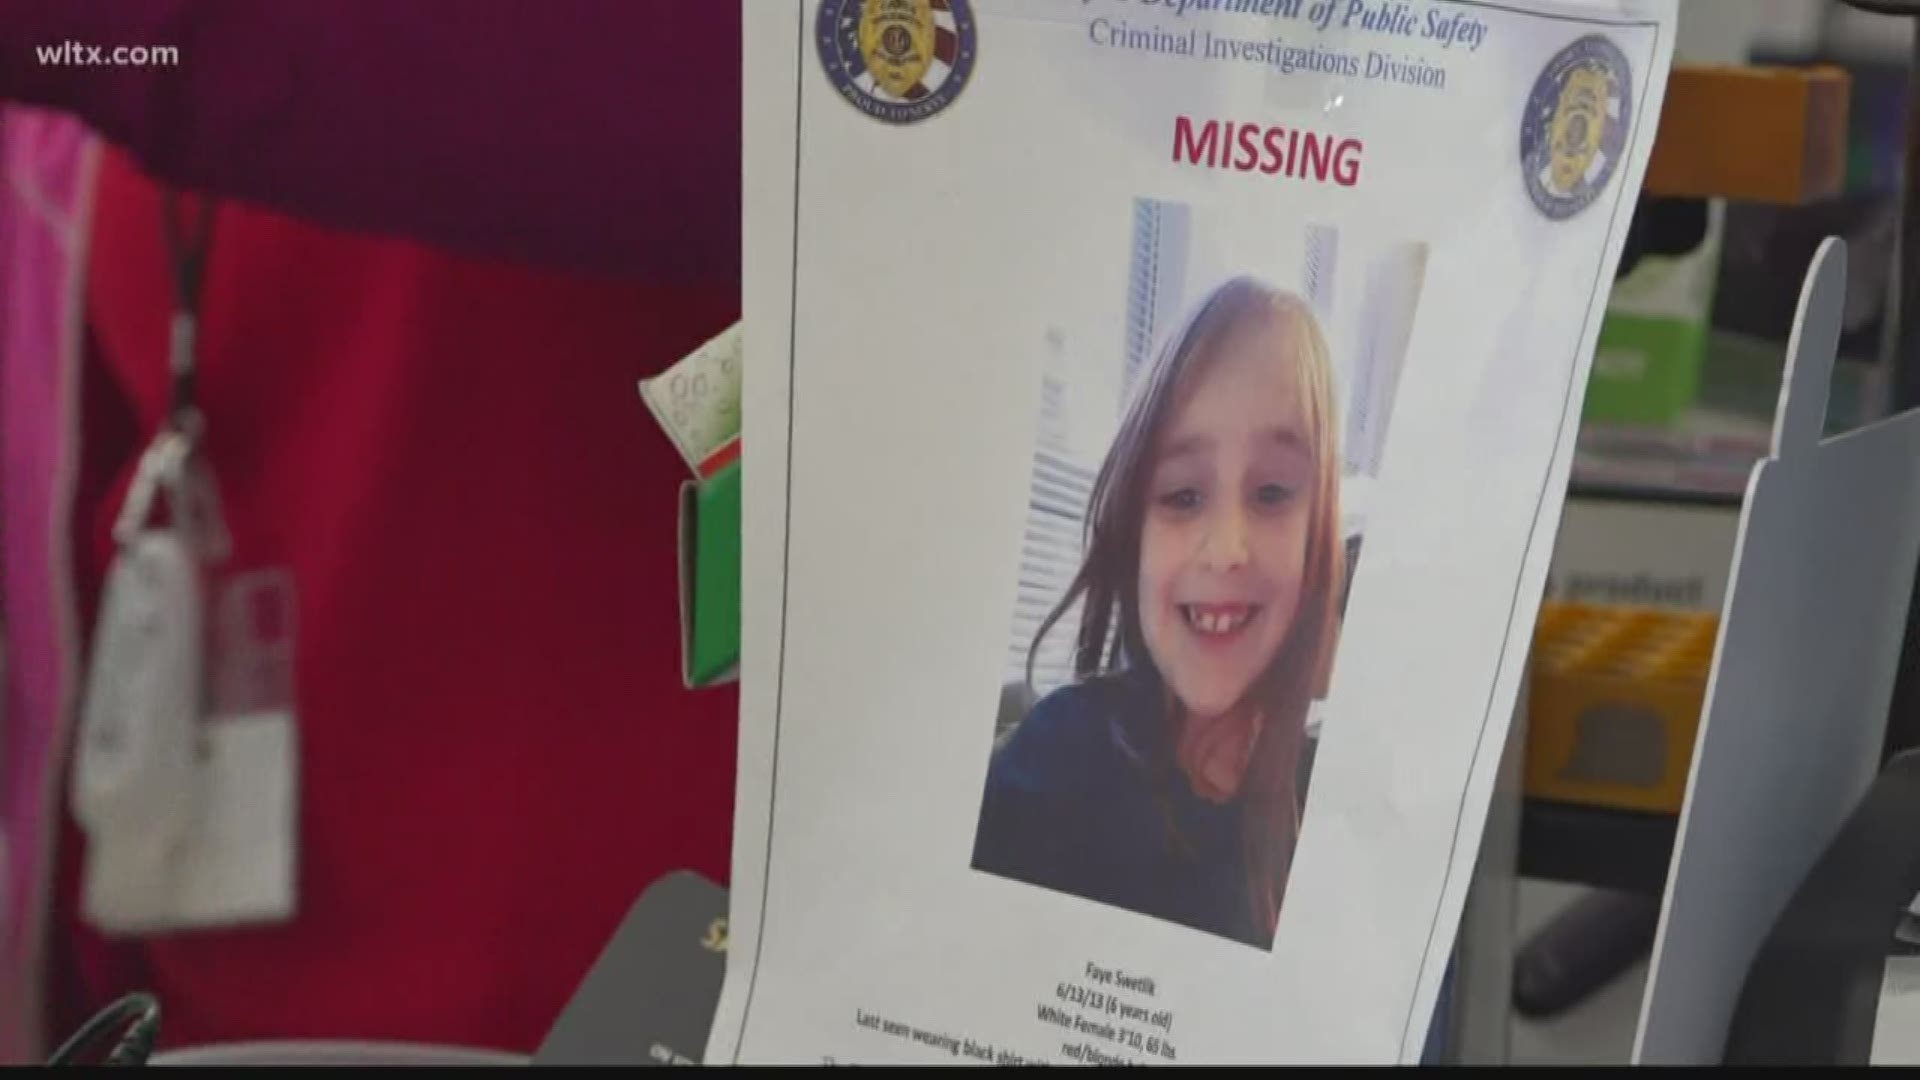 6-year-old Faye Swetlik was last seen around 3:45 p.m. Monday at her Churchill Heights home in Cayce. Call 803-205-4444 with tips and information.